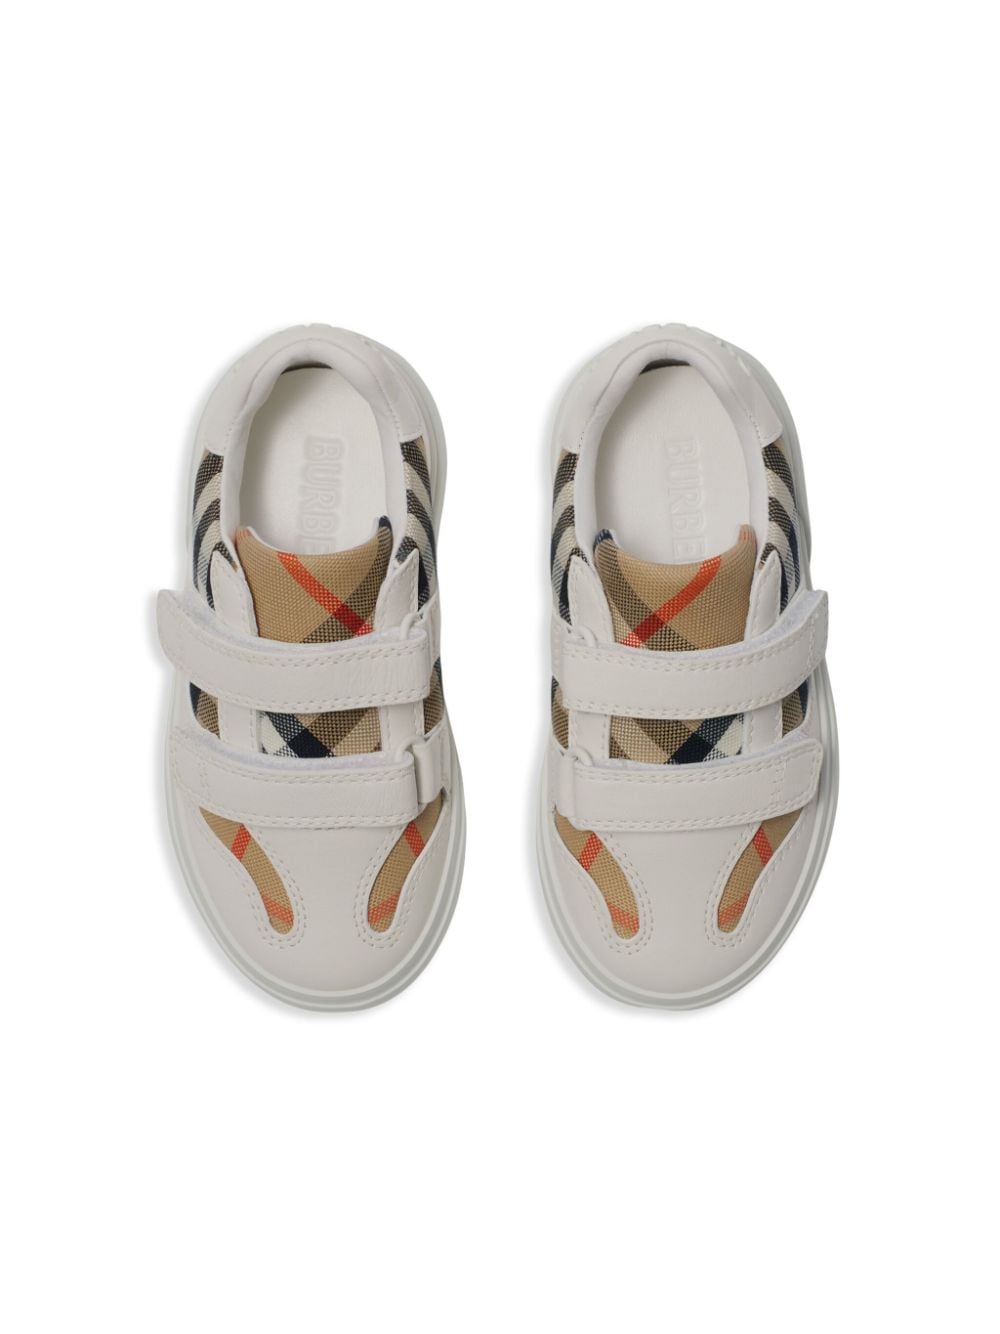 Unisex sneaker in white leather and cotton